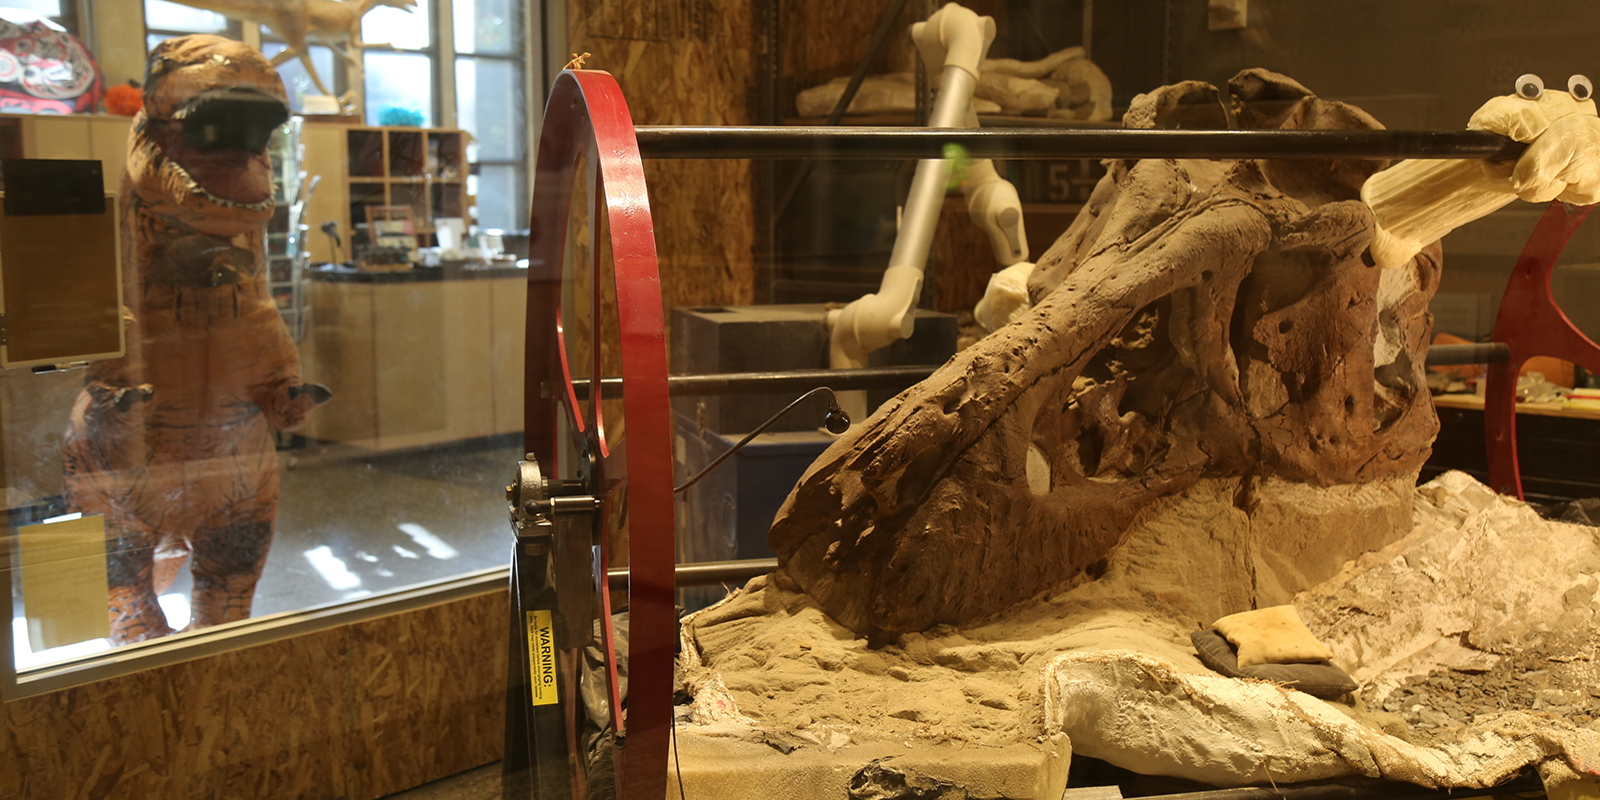 The T. rex skull in the foreground with a person dressed in an inflatable T. rex costume in the background